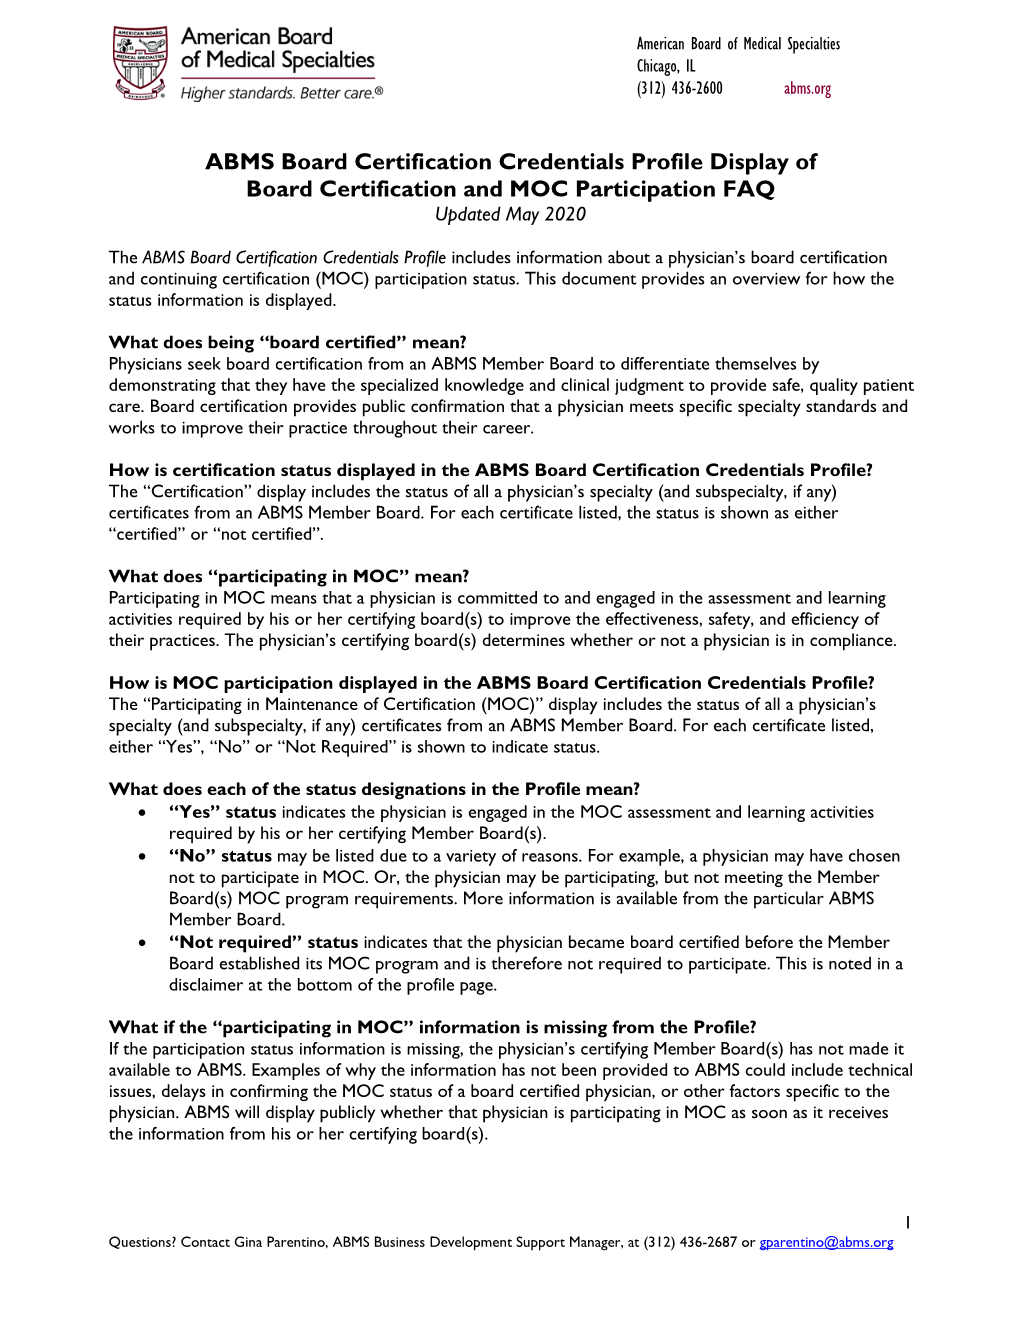 ABMS Board Certification Credentials Profile Display of Board Certification and MOC Participation FAQ Updated May 2020